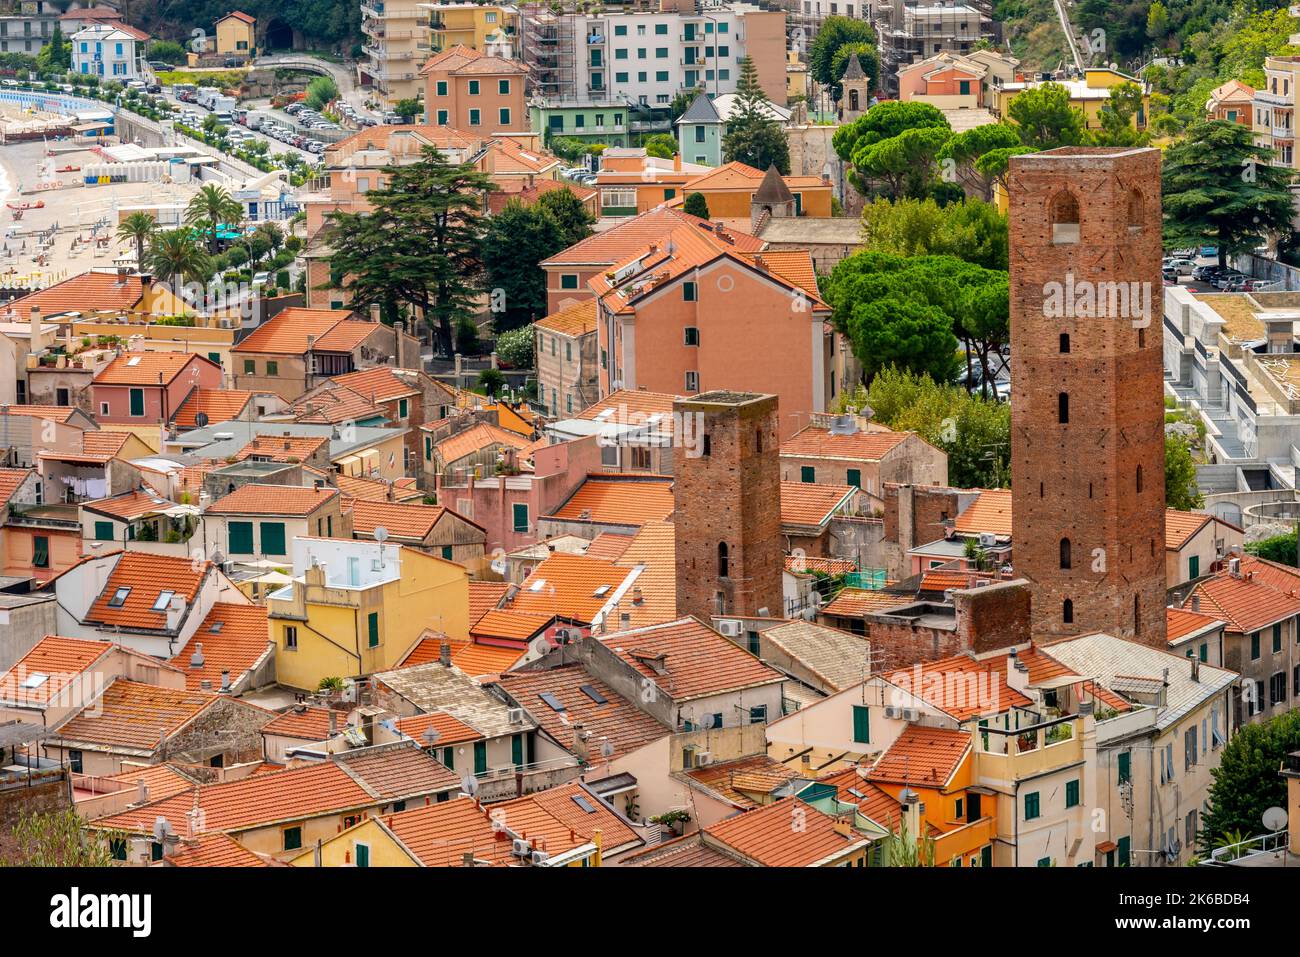 Elevated panoramic view of old town Noli, Liguria, Italy. Stock Photo